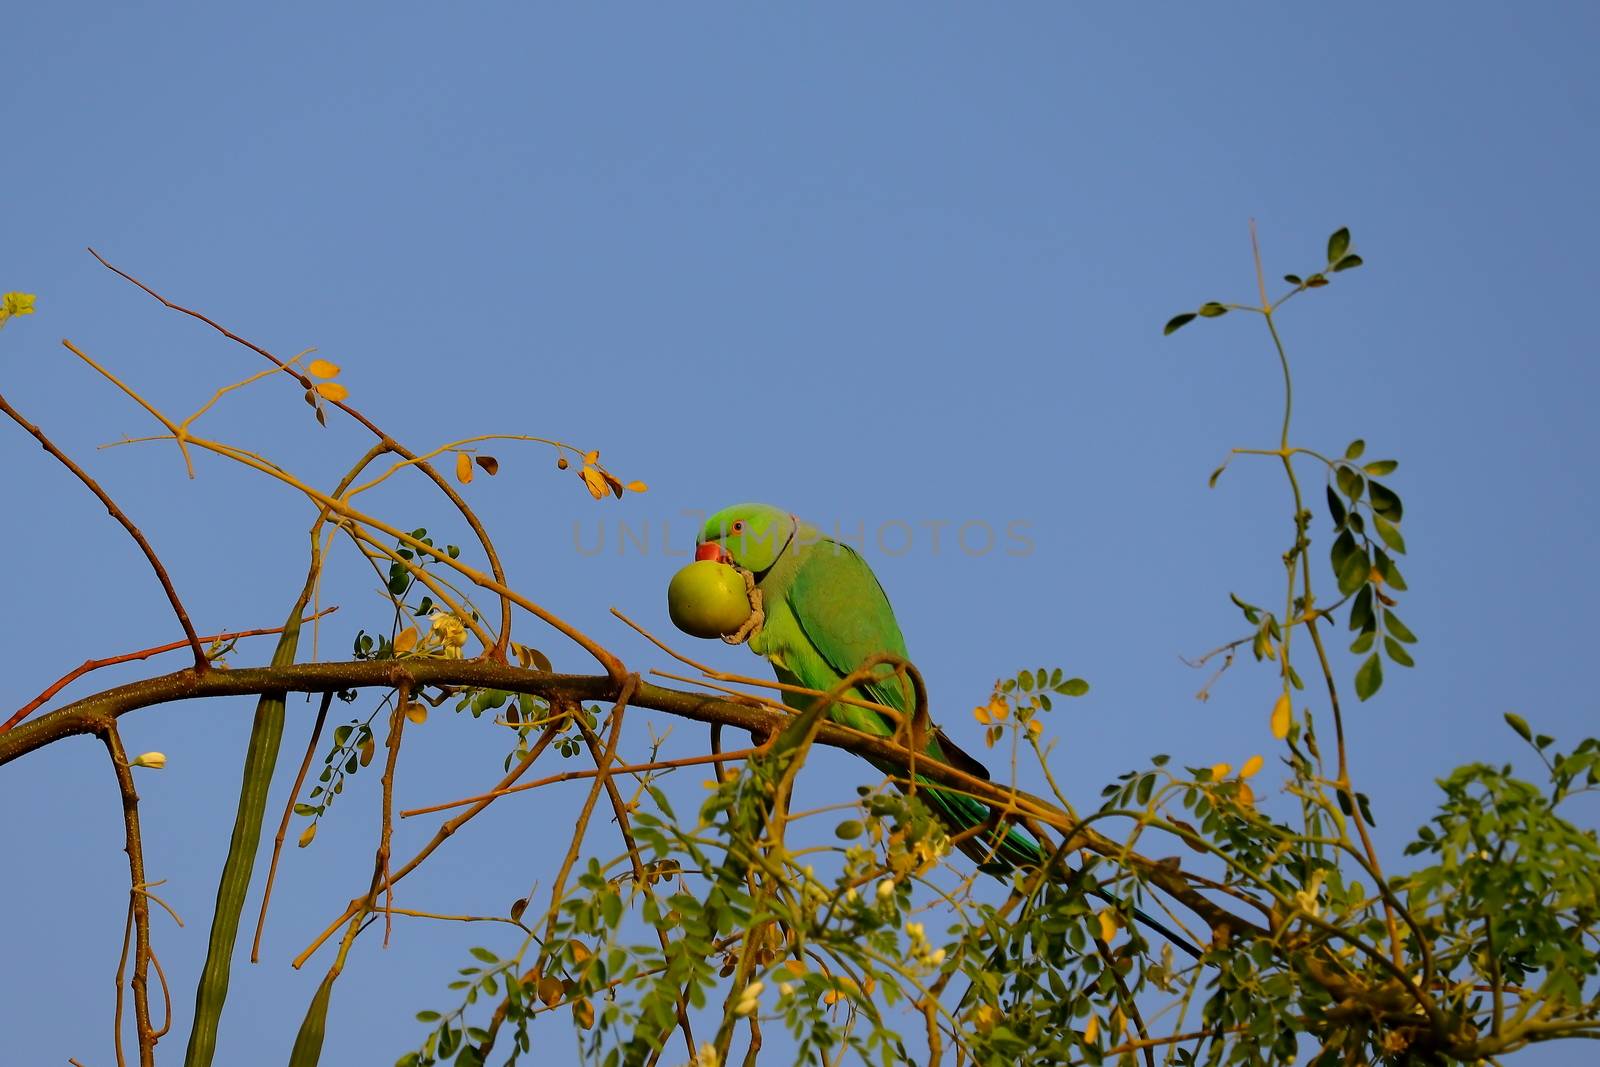 parrot carrying jujube fruit by 9500102400